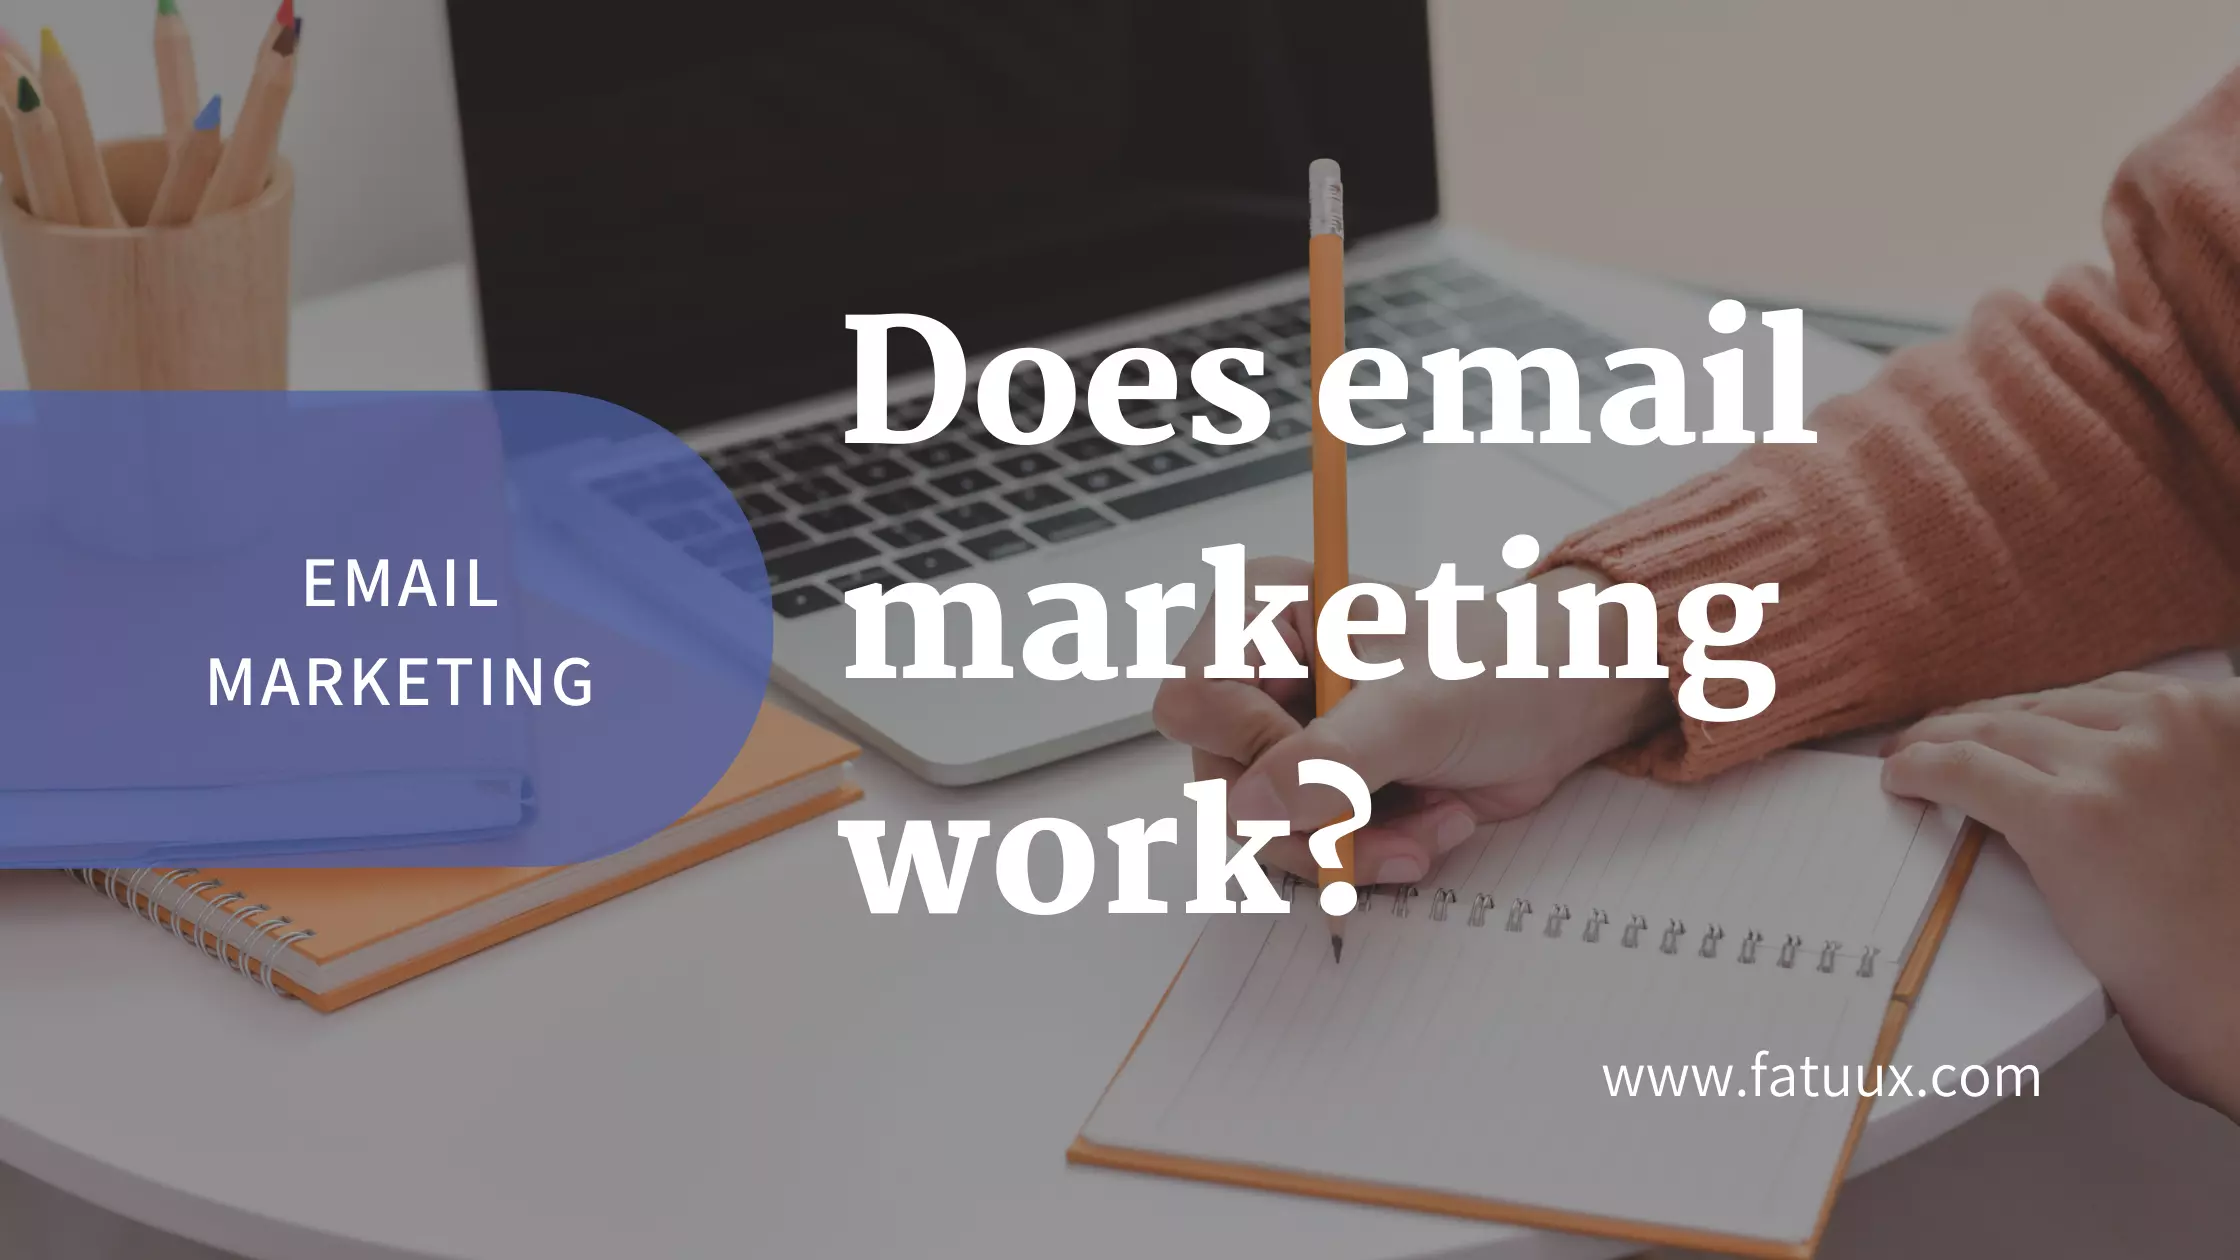 Does email marketing work?